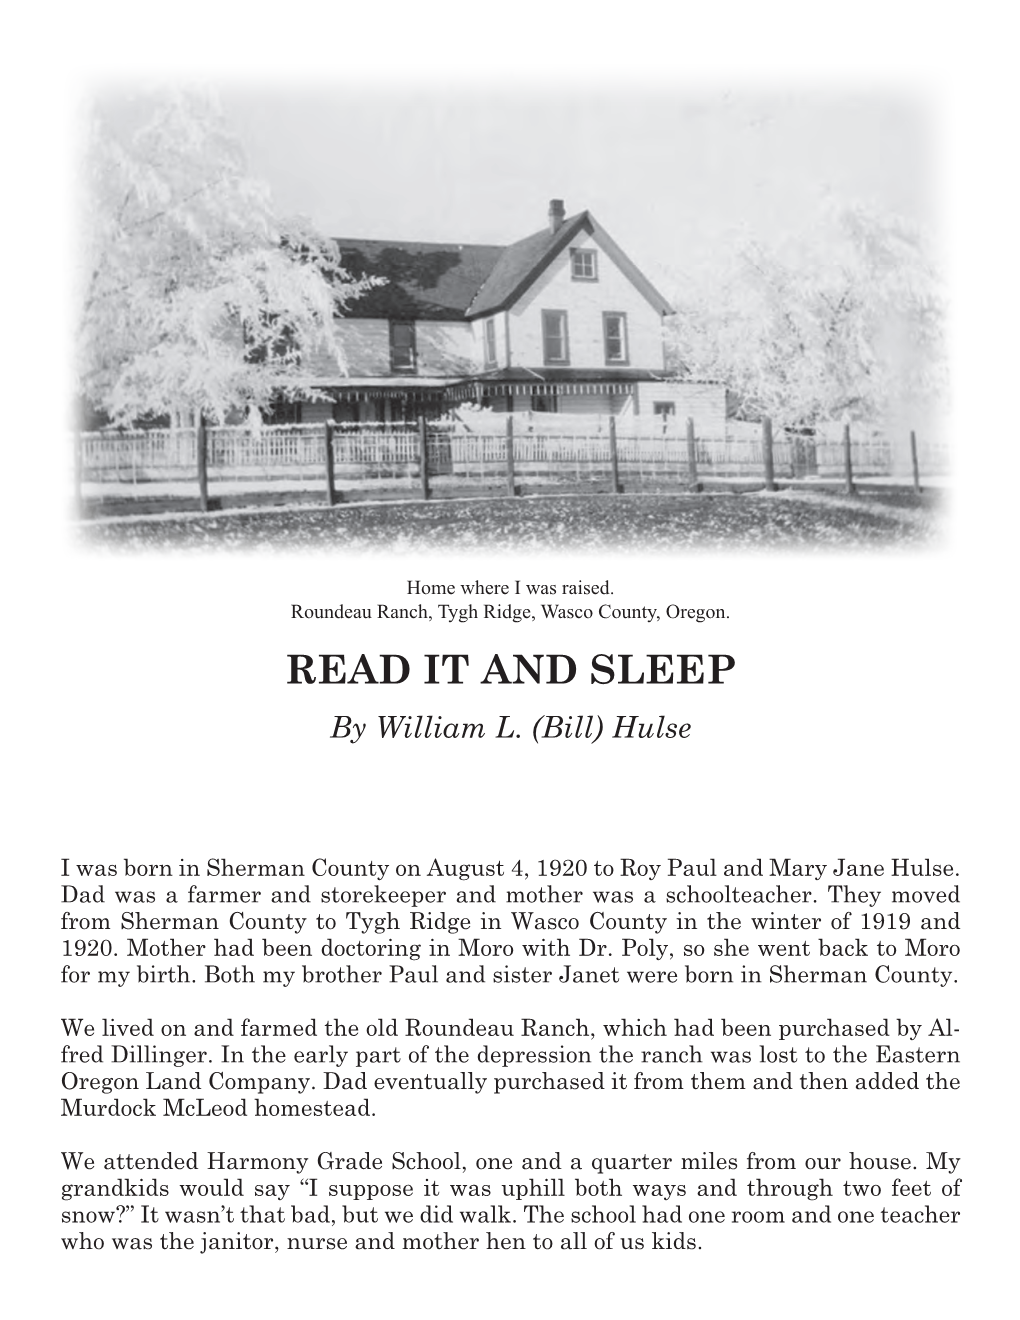 READ IT and SLEEP by William L